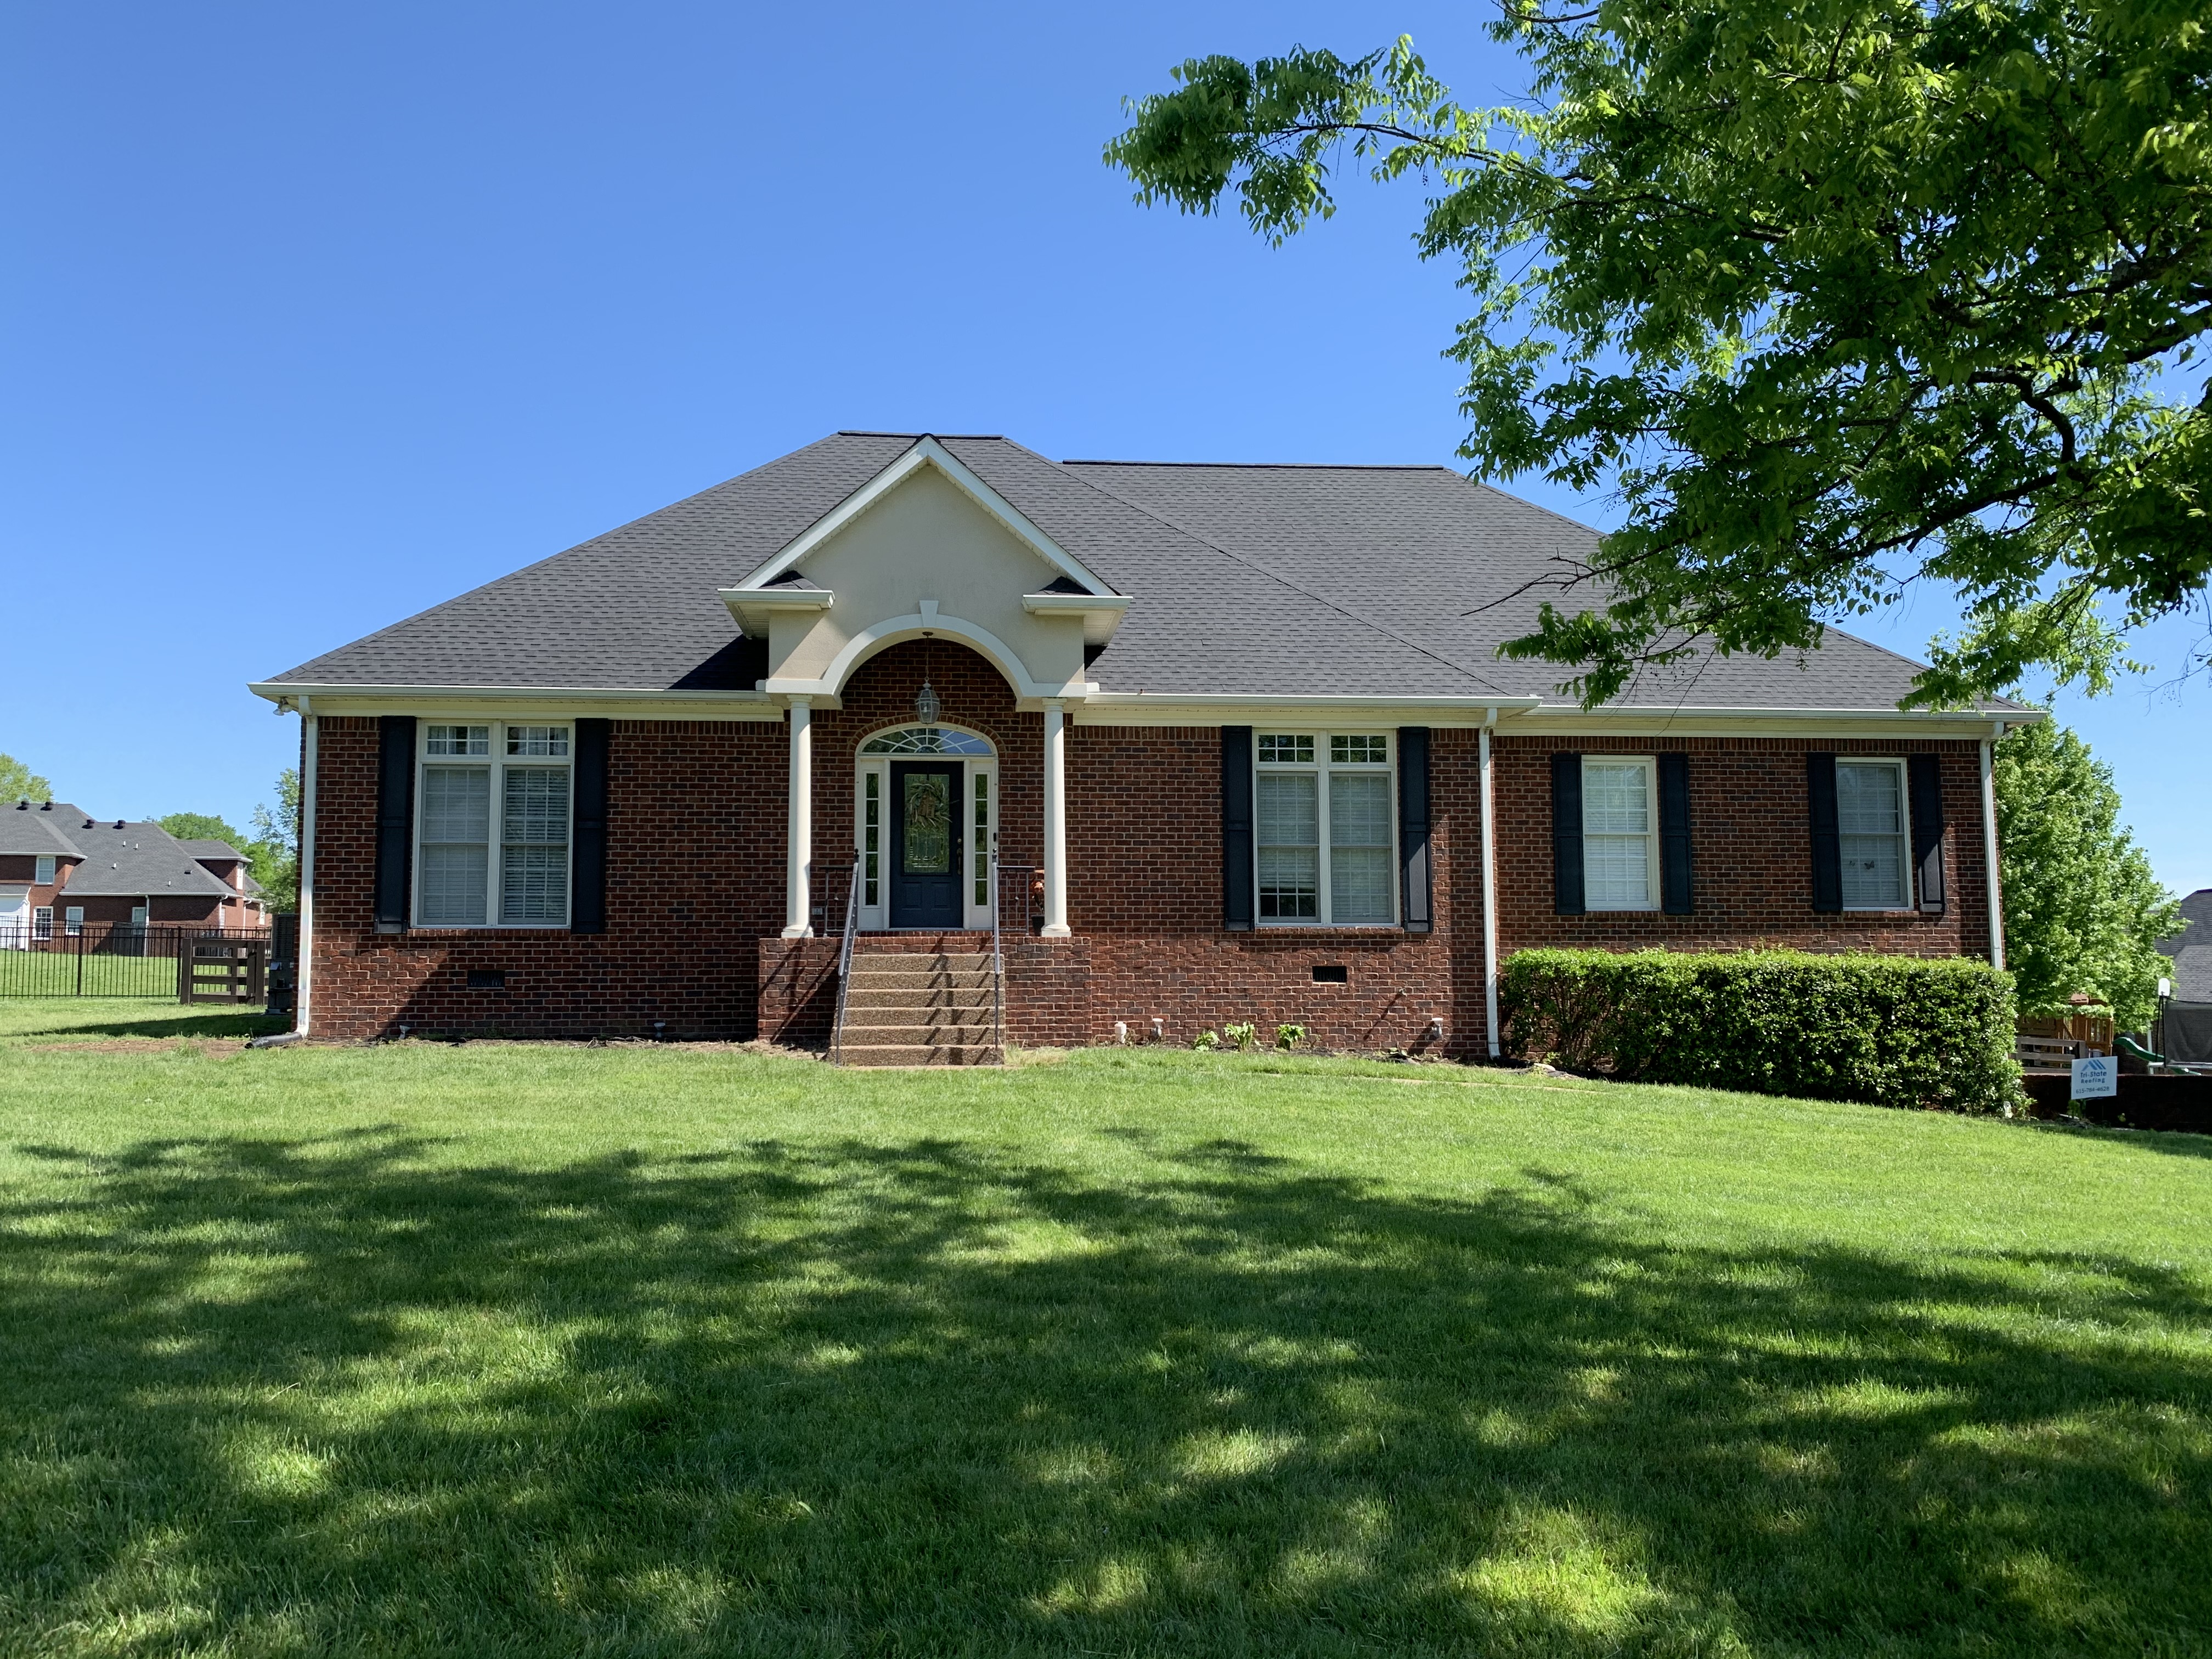 red brick home with dark grey / black roof and green grass in Lebanon TN